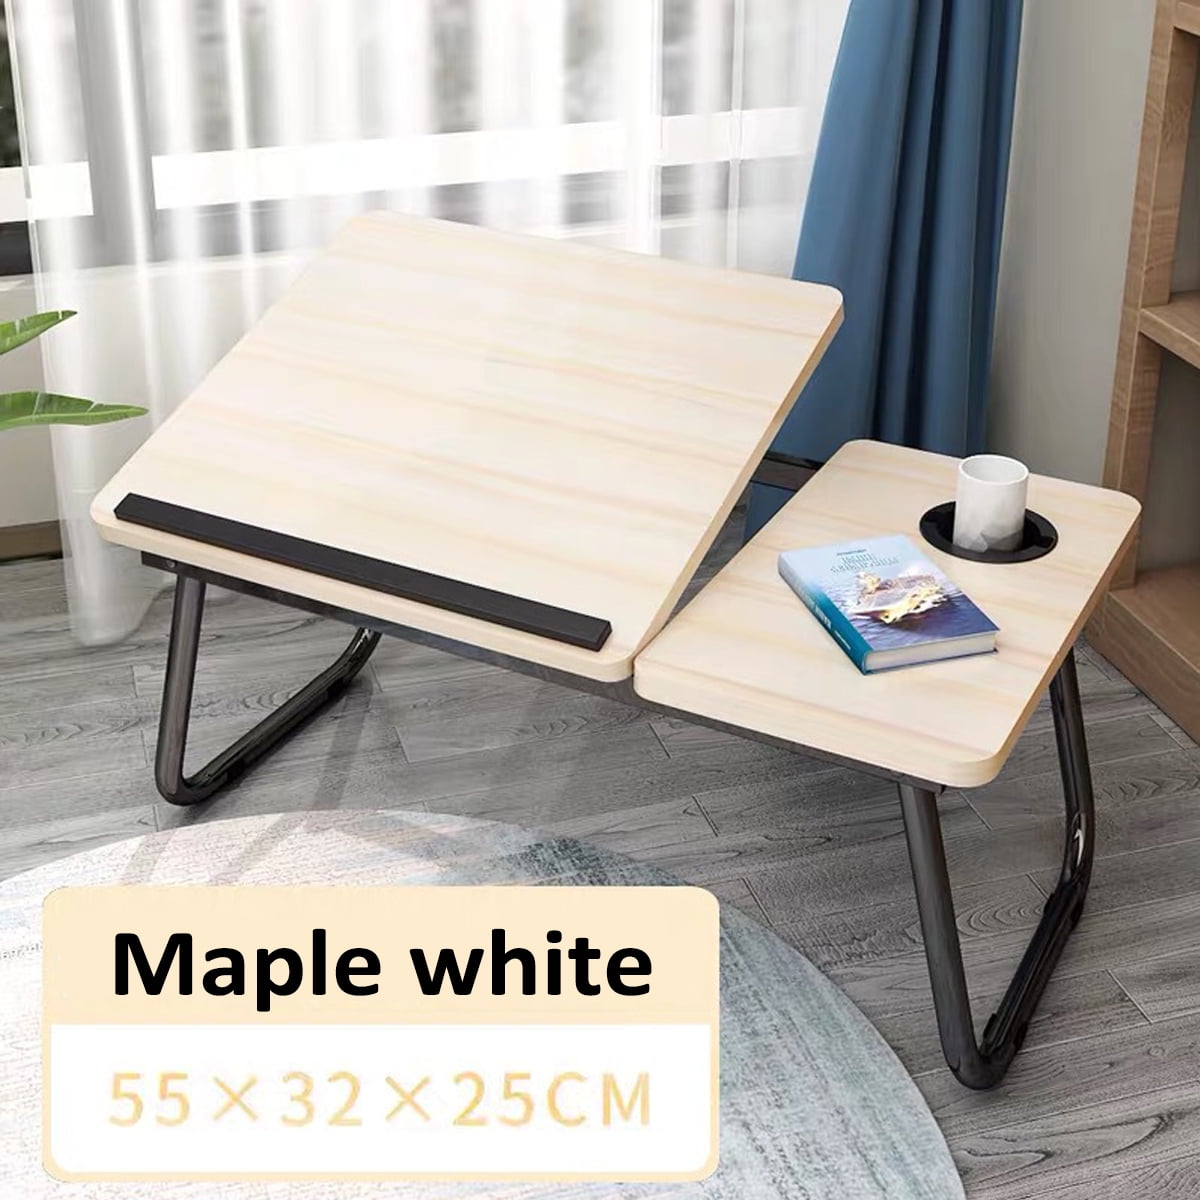 Height and Angle Adjustable Notebook Stand Folding Lap Holder for Adults Breakfast and Bed Tray Table VANKYO Foldable Laptop Standing Desk Portable Laptop Table